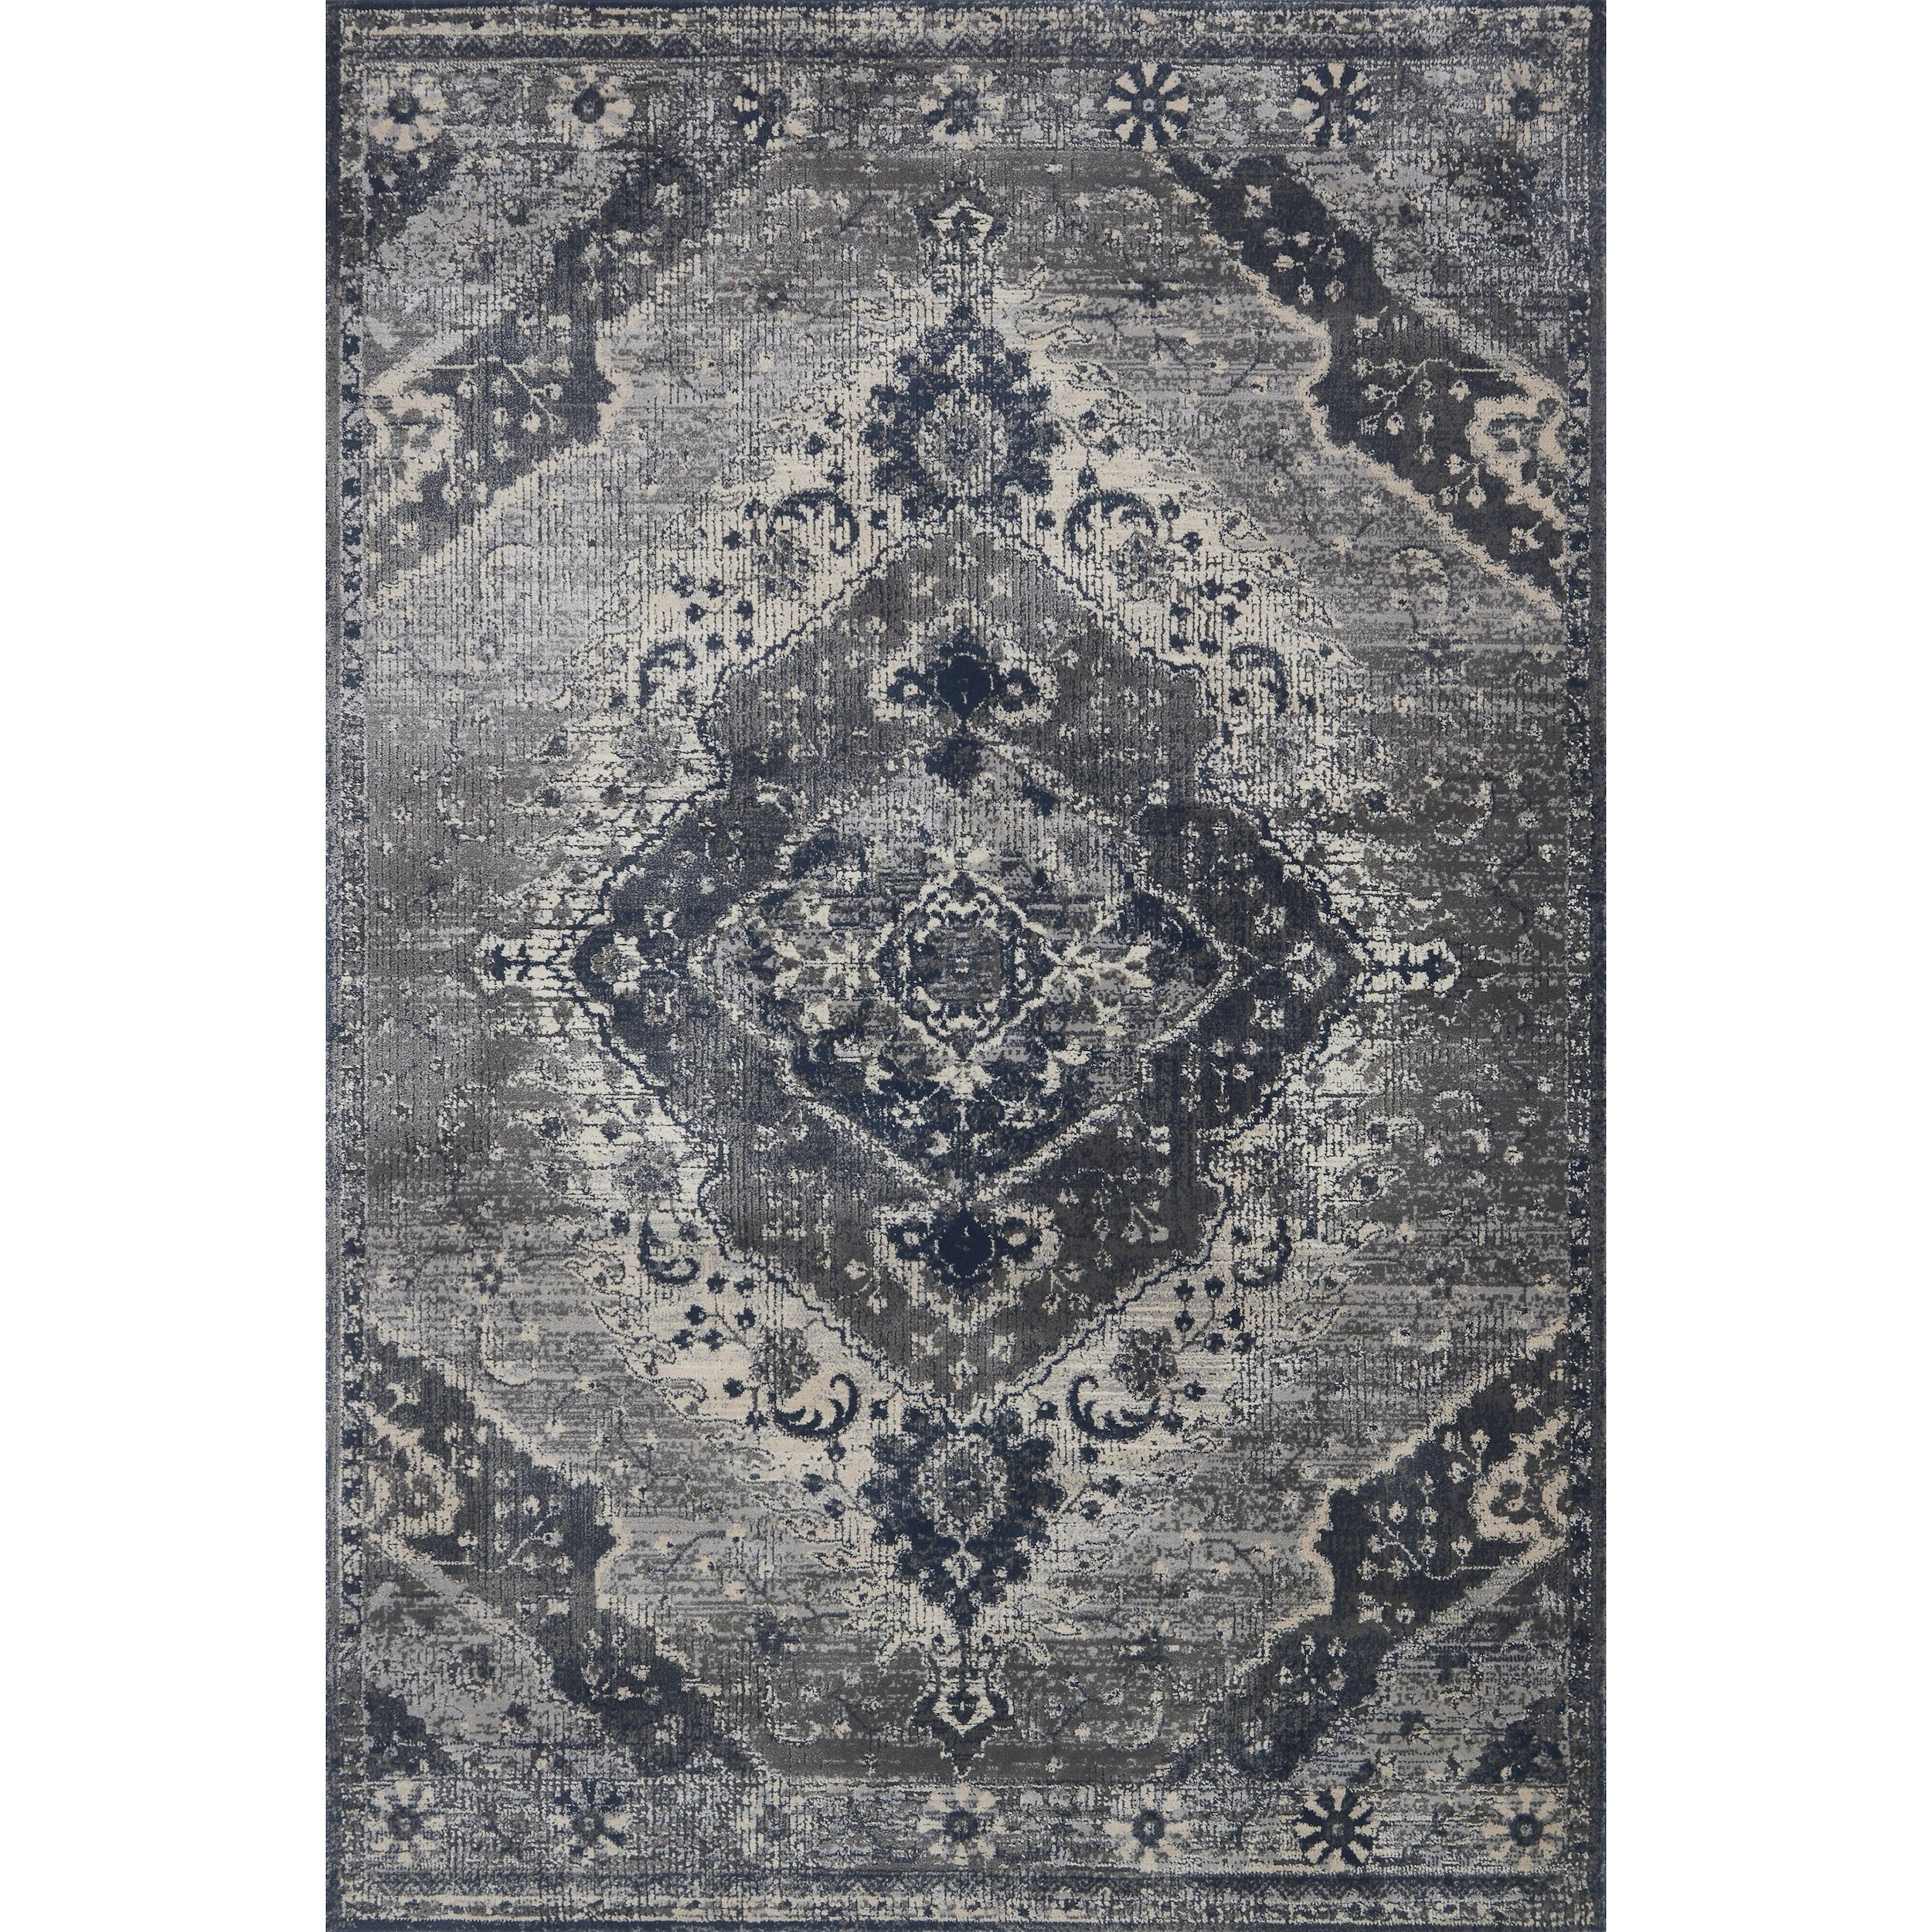 dark grey and silver rug with traditional pattern